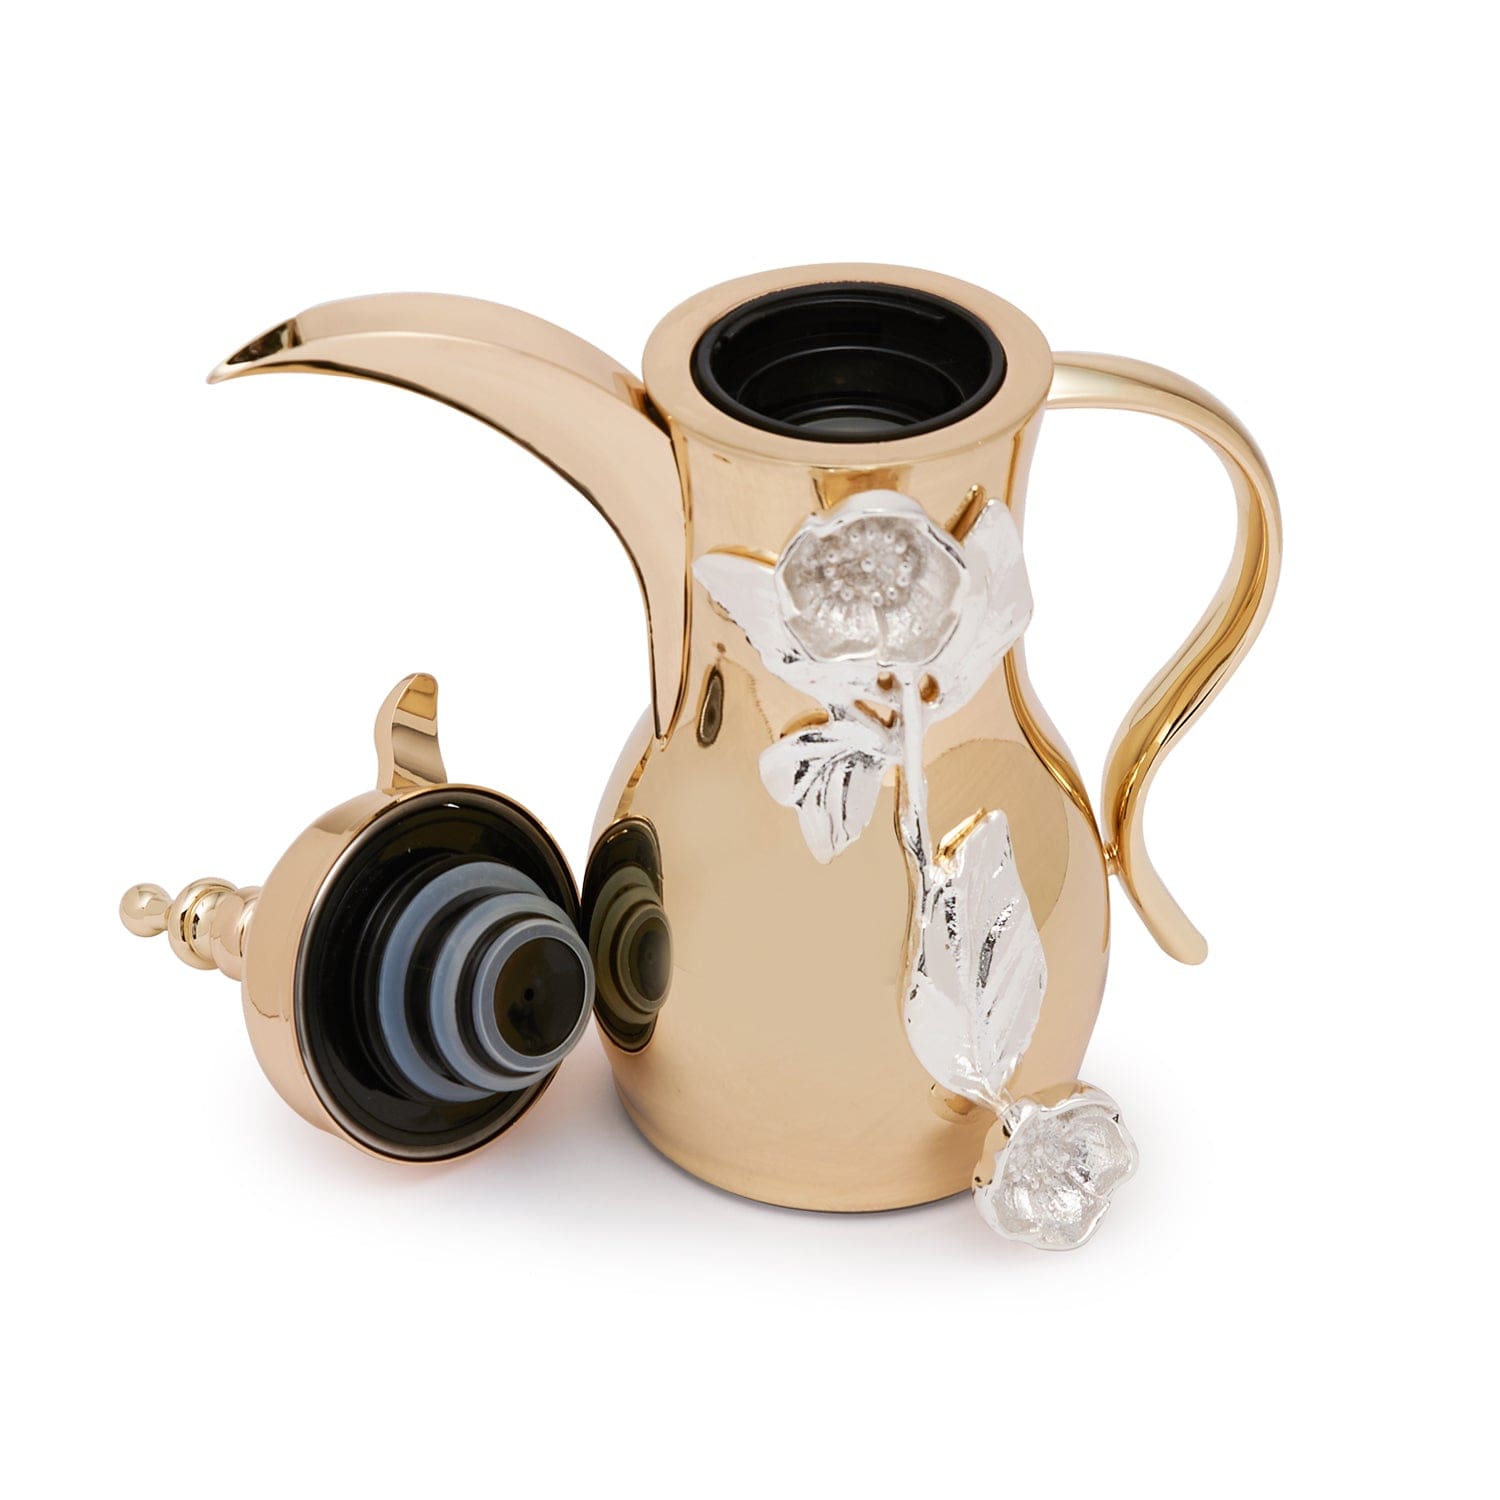 Pantazelos 4 Seasons Of Blossoms Goldplated and Silverplated Dallah Thermos - 1327-SINGLE/GPSP